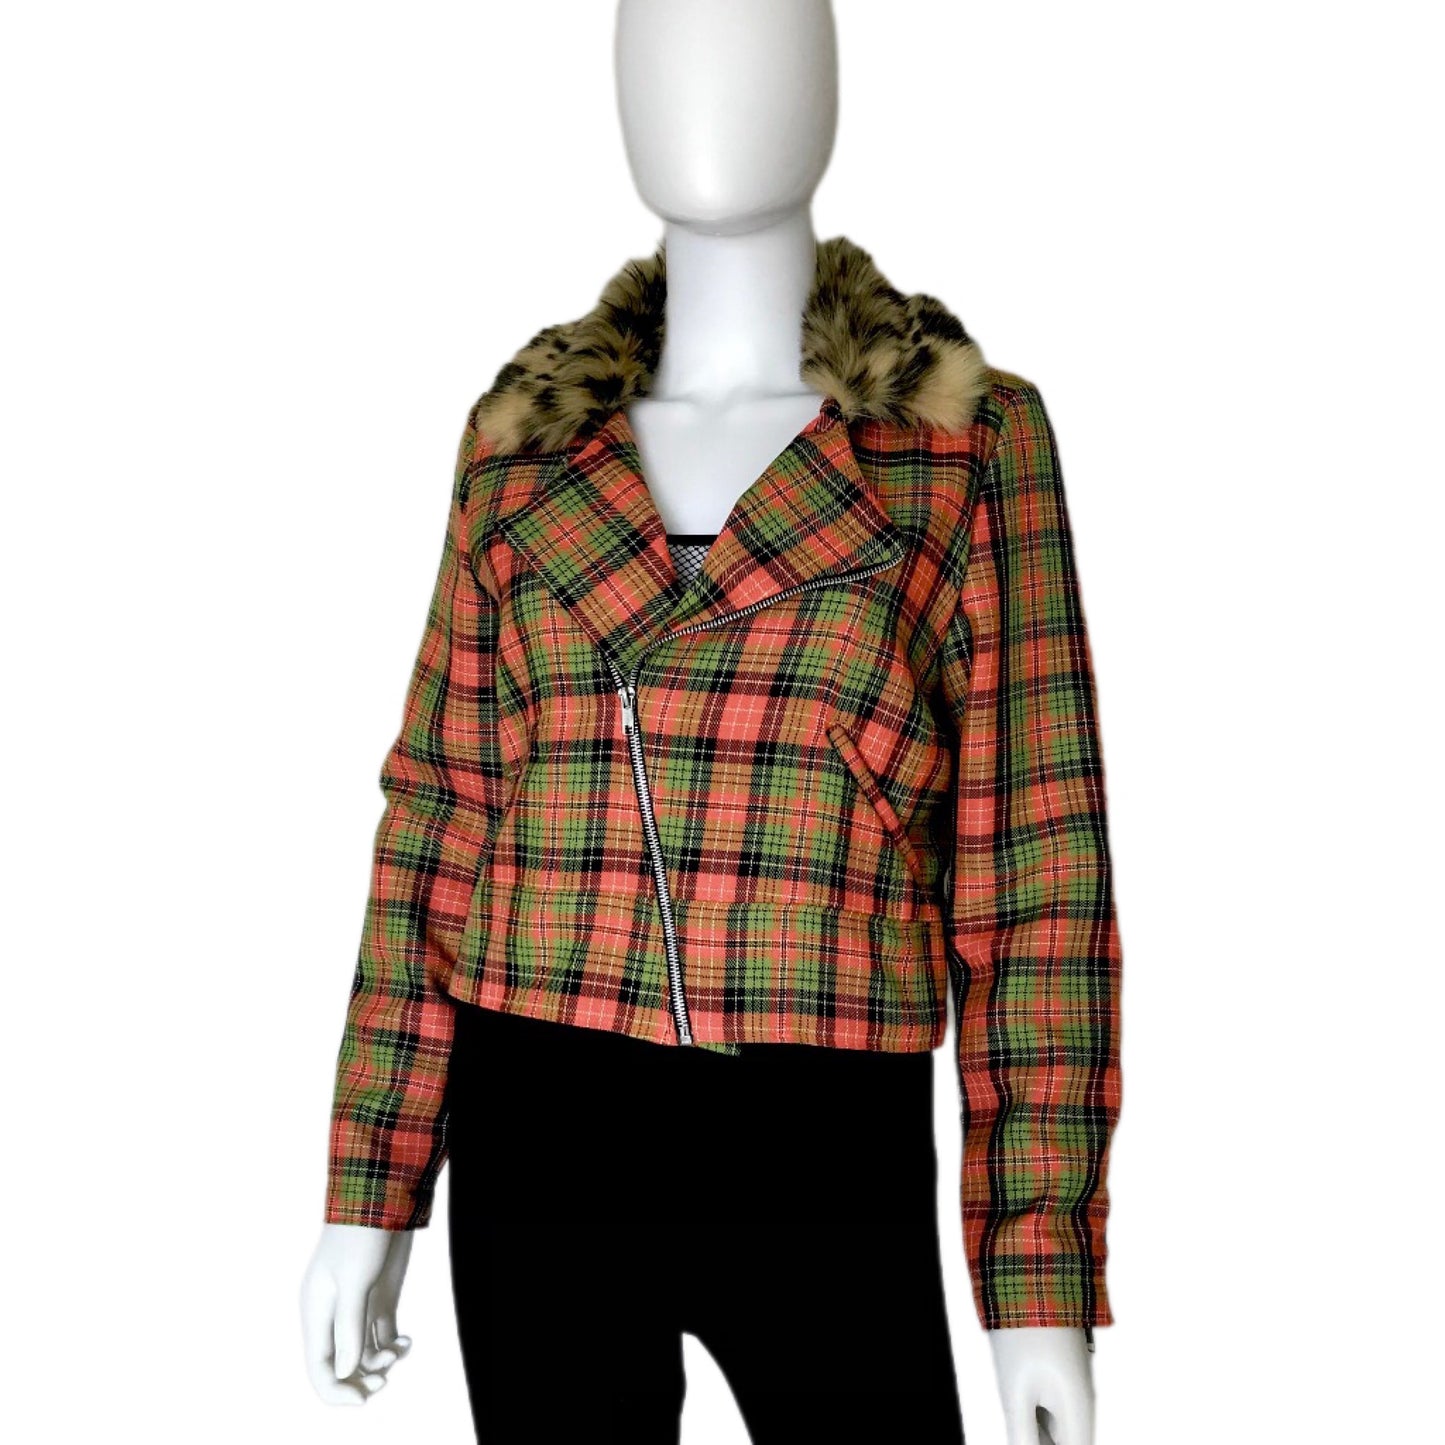 Plaid Women's Moto Jacket with Fur Collar - Size Small